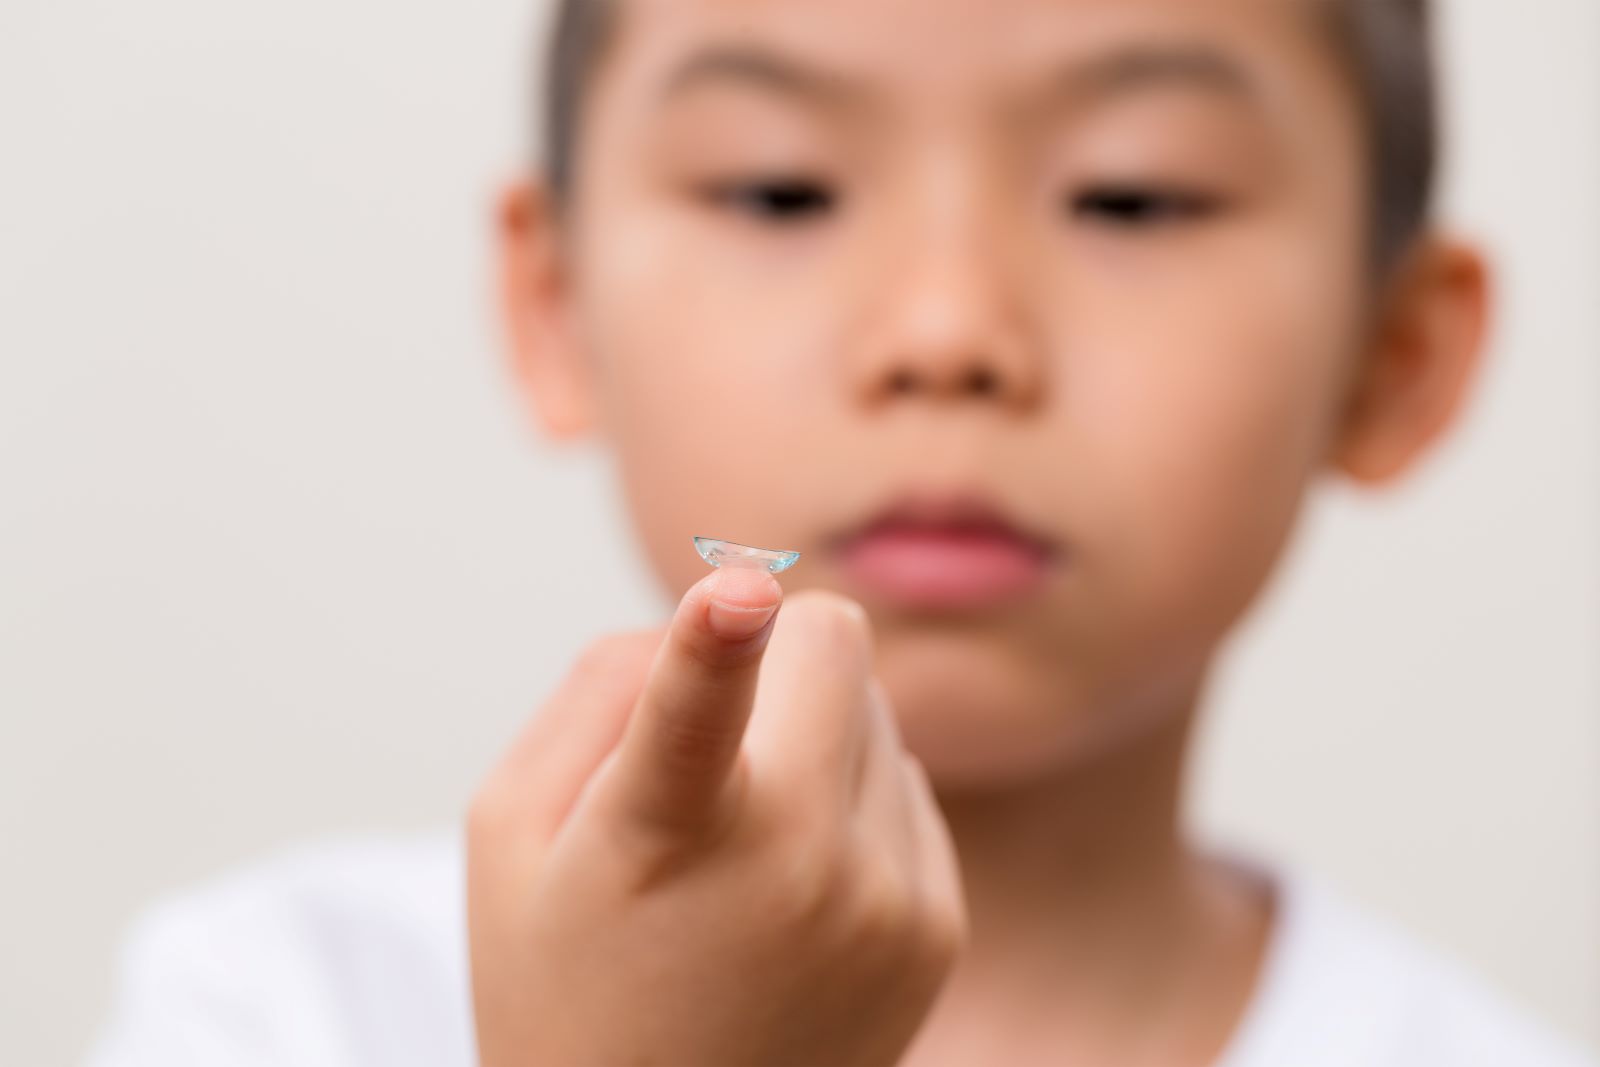 Are Contact Lenses Suitable for Children to Wear?